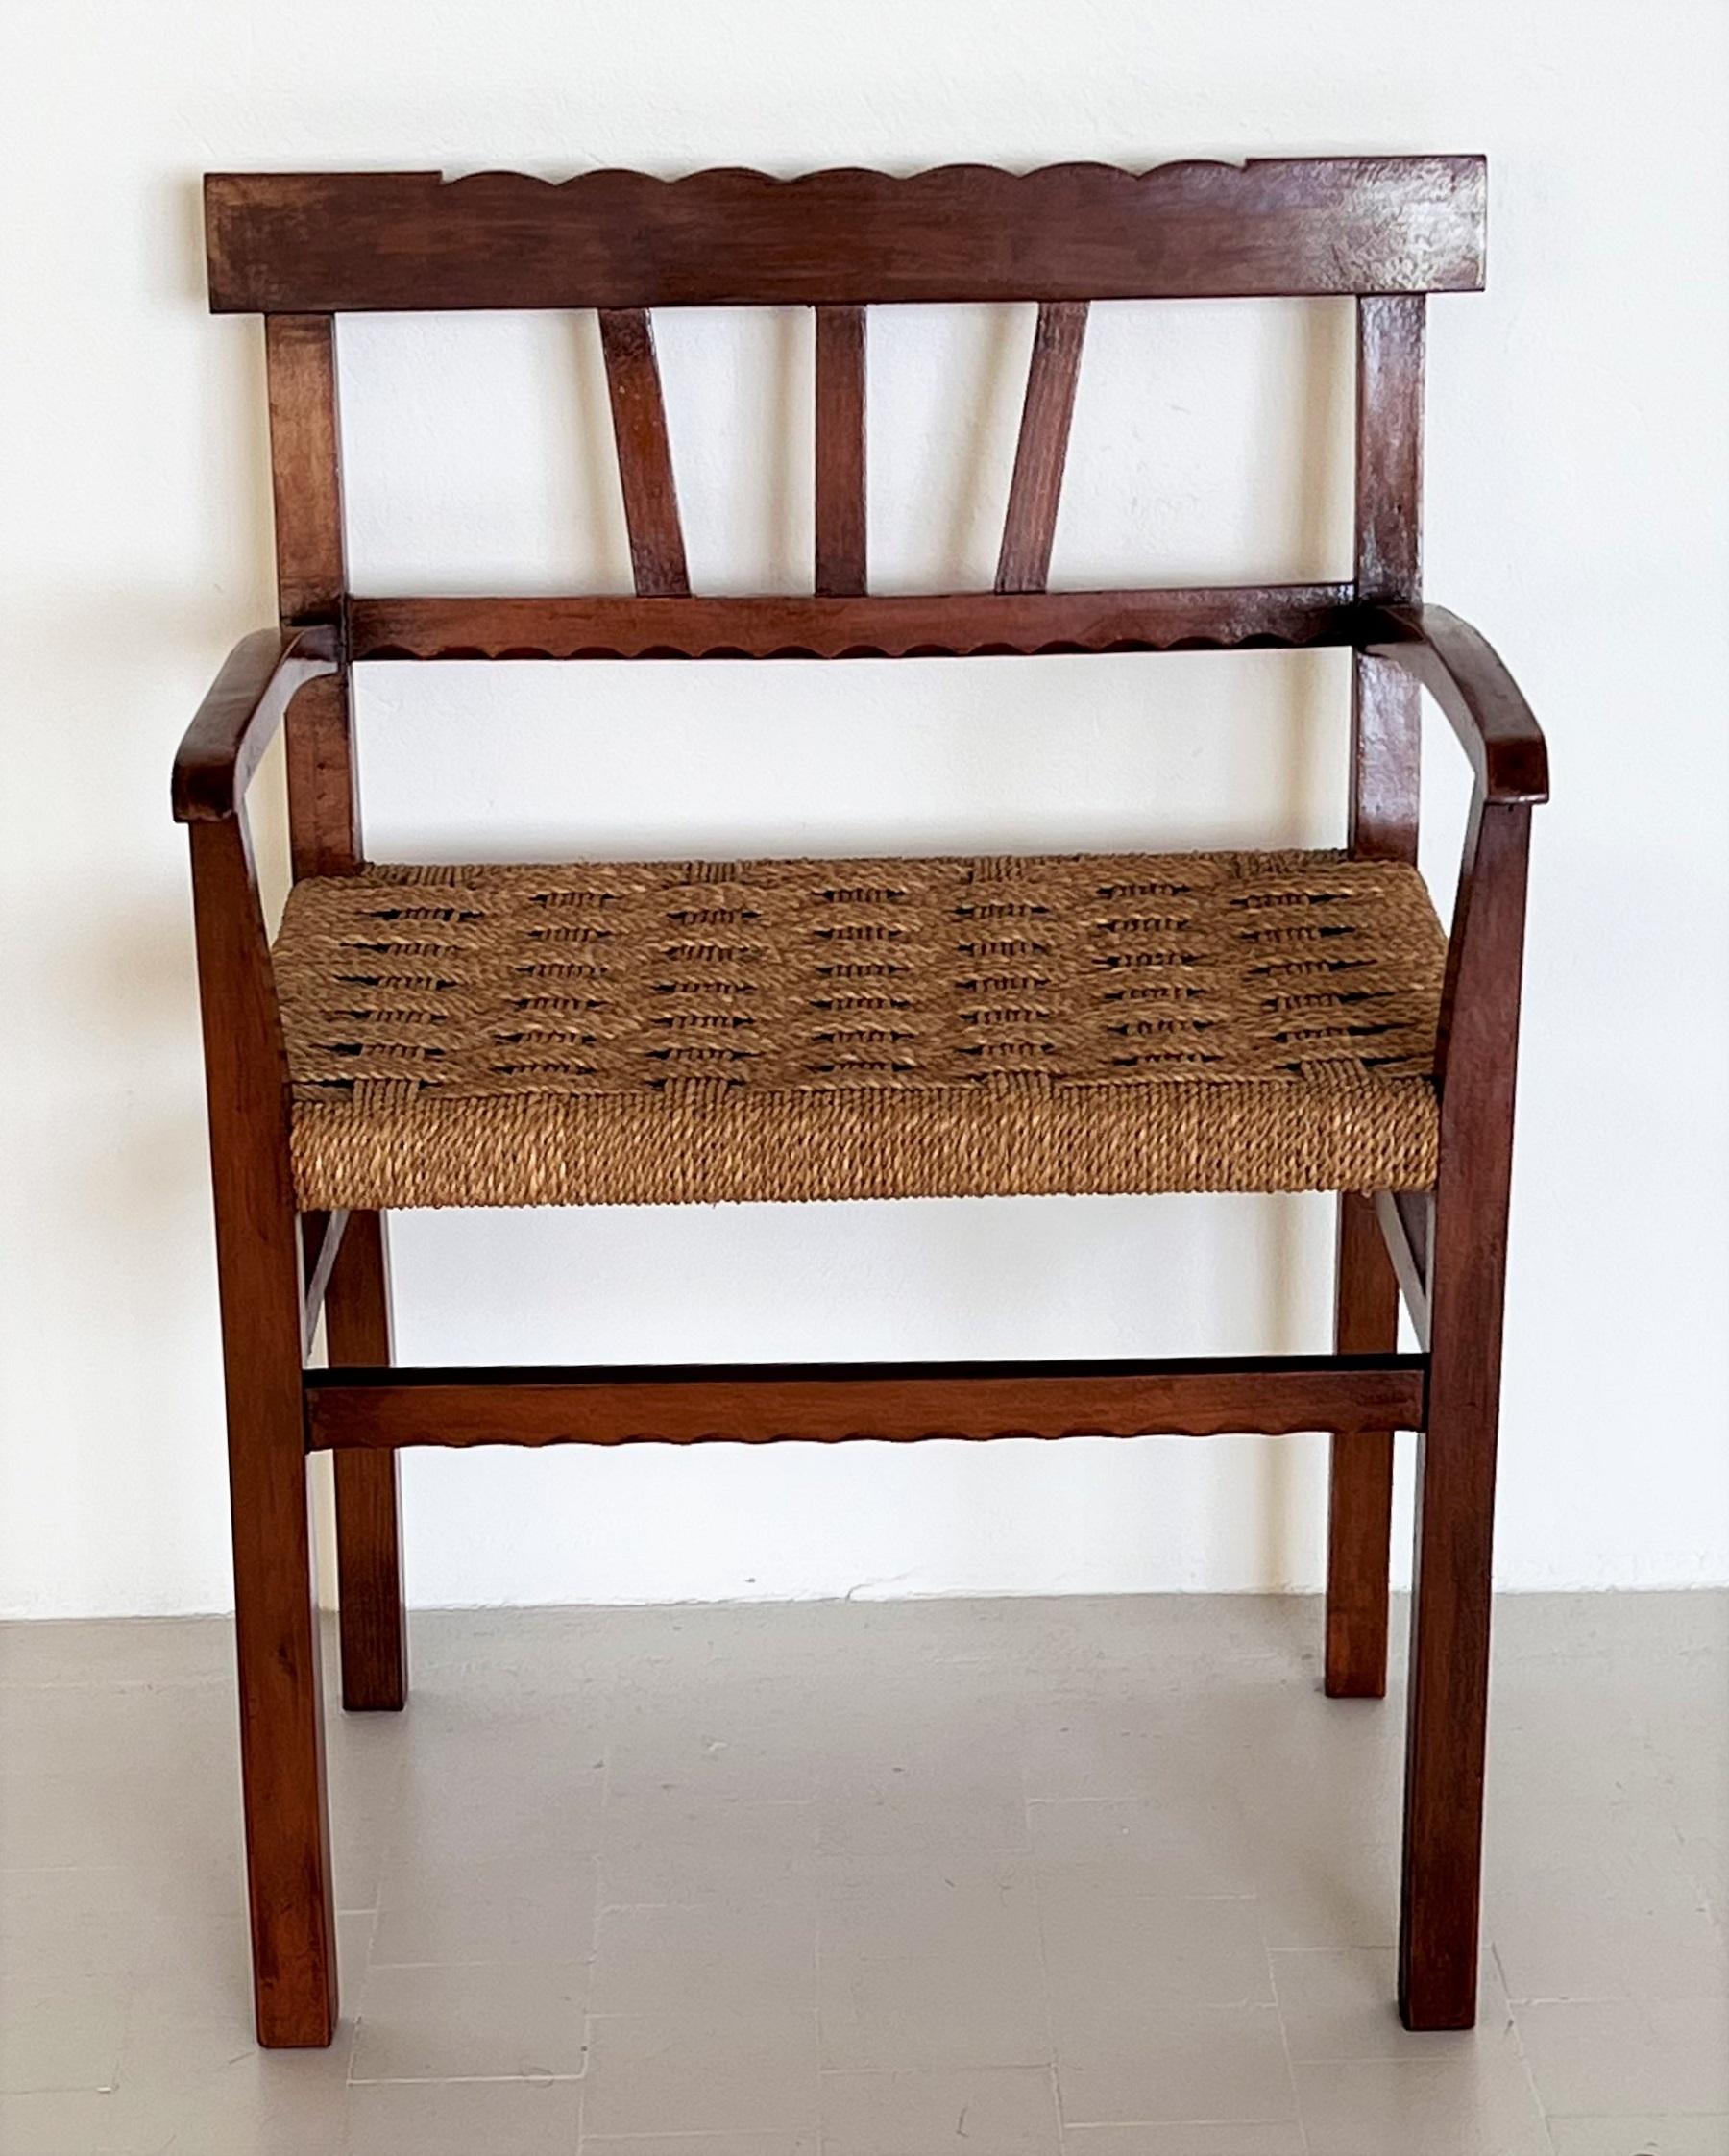 Italian Classic Large Beechwood Chair with Hand-Crafted Rope Seat, 1980s For Sale 1